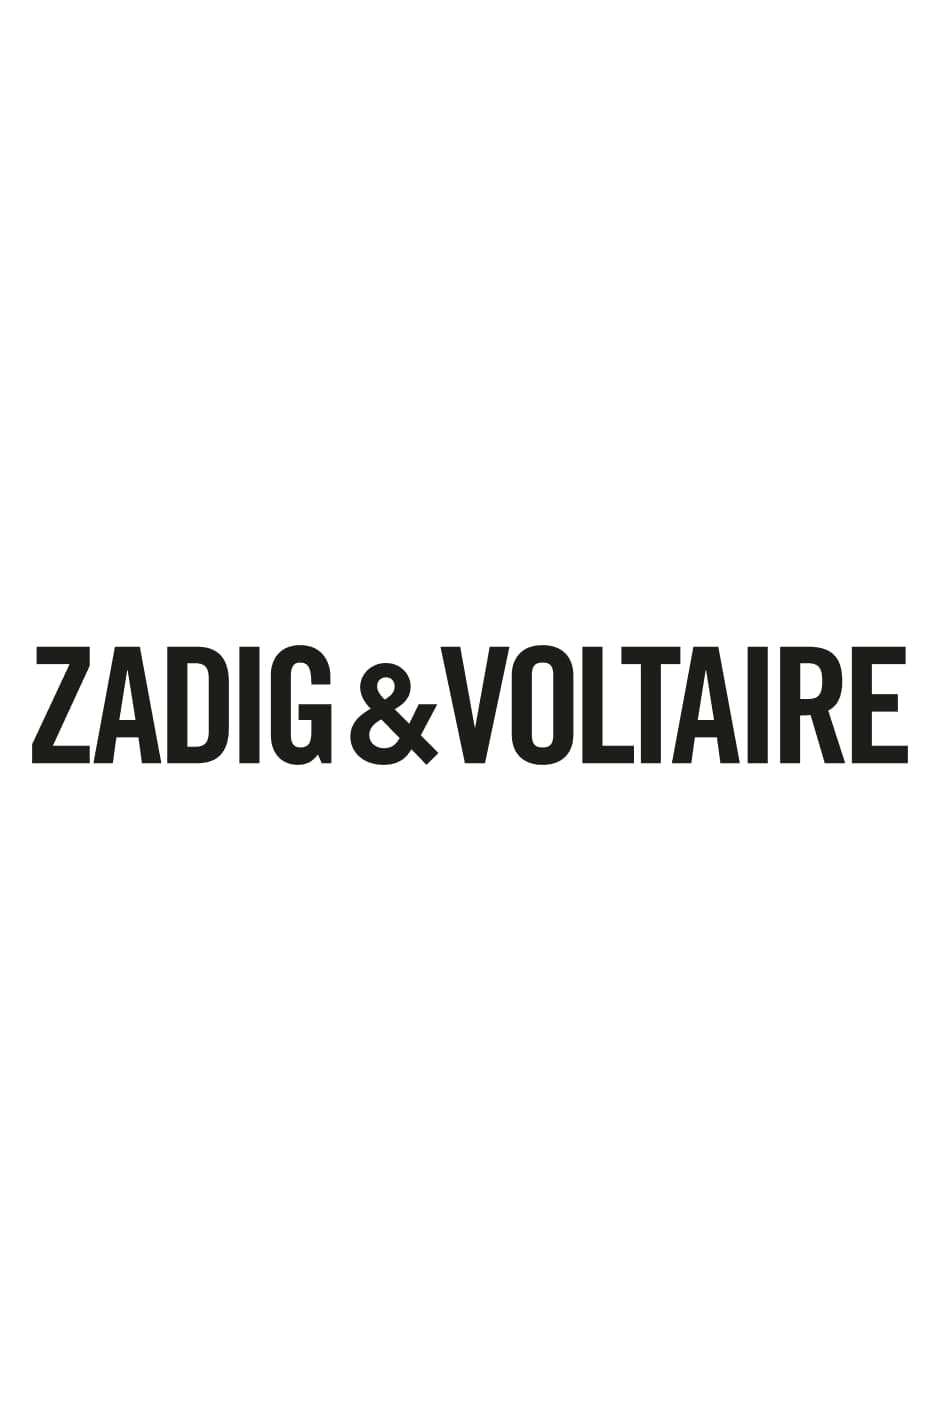 Book "Zadig&Voltaire: Established 1997 in Paris" - French Version The first monograph on Zadig&Voltaire, published on the occasion of the brand’s 25th anniversary - French version.